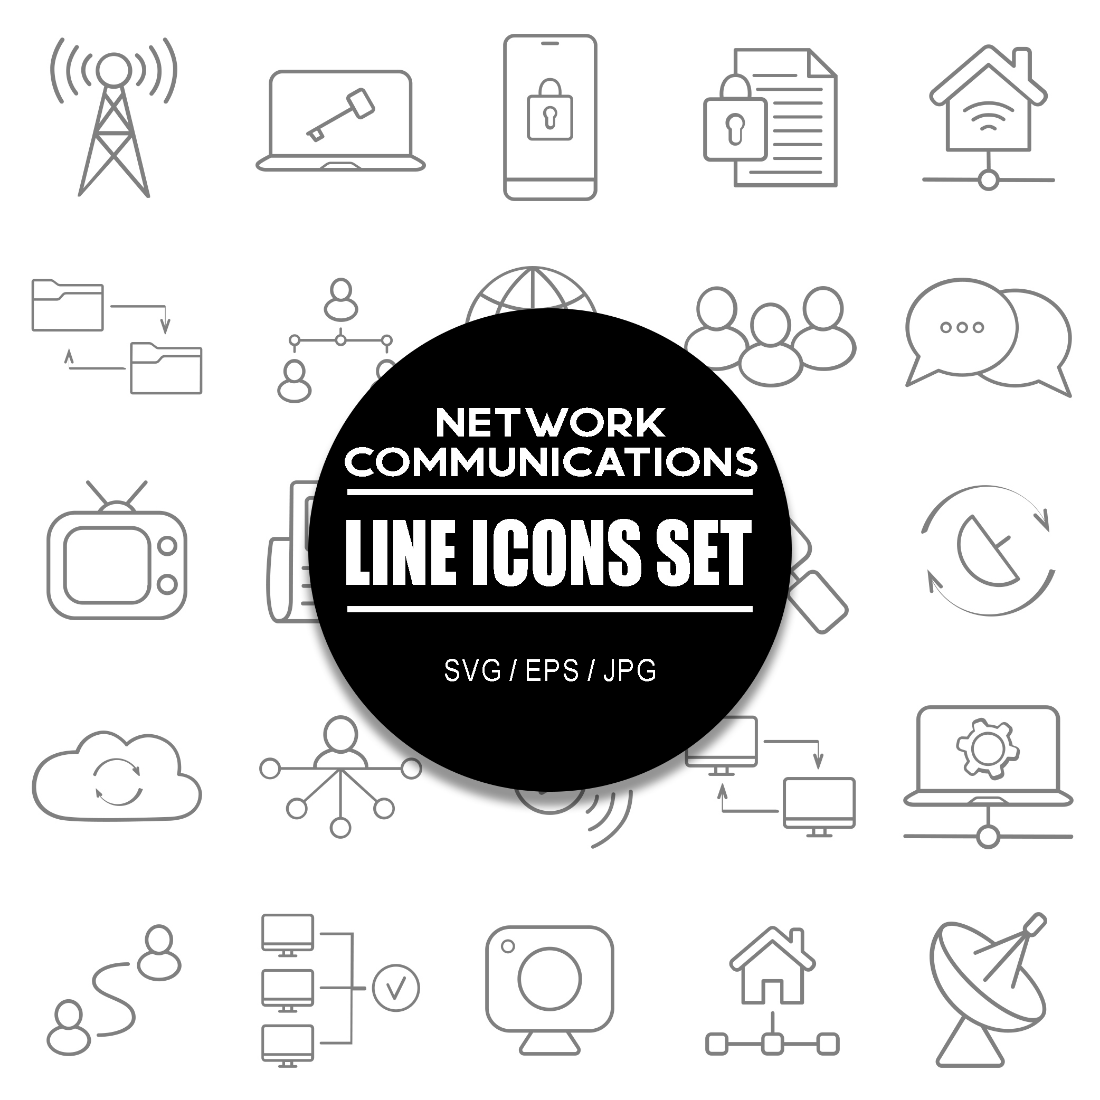 Network and Communications Line Icon Set cover image.